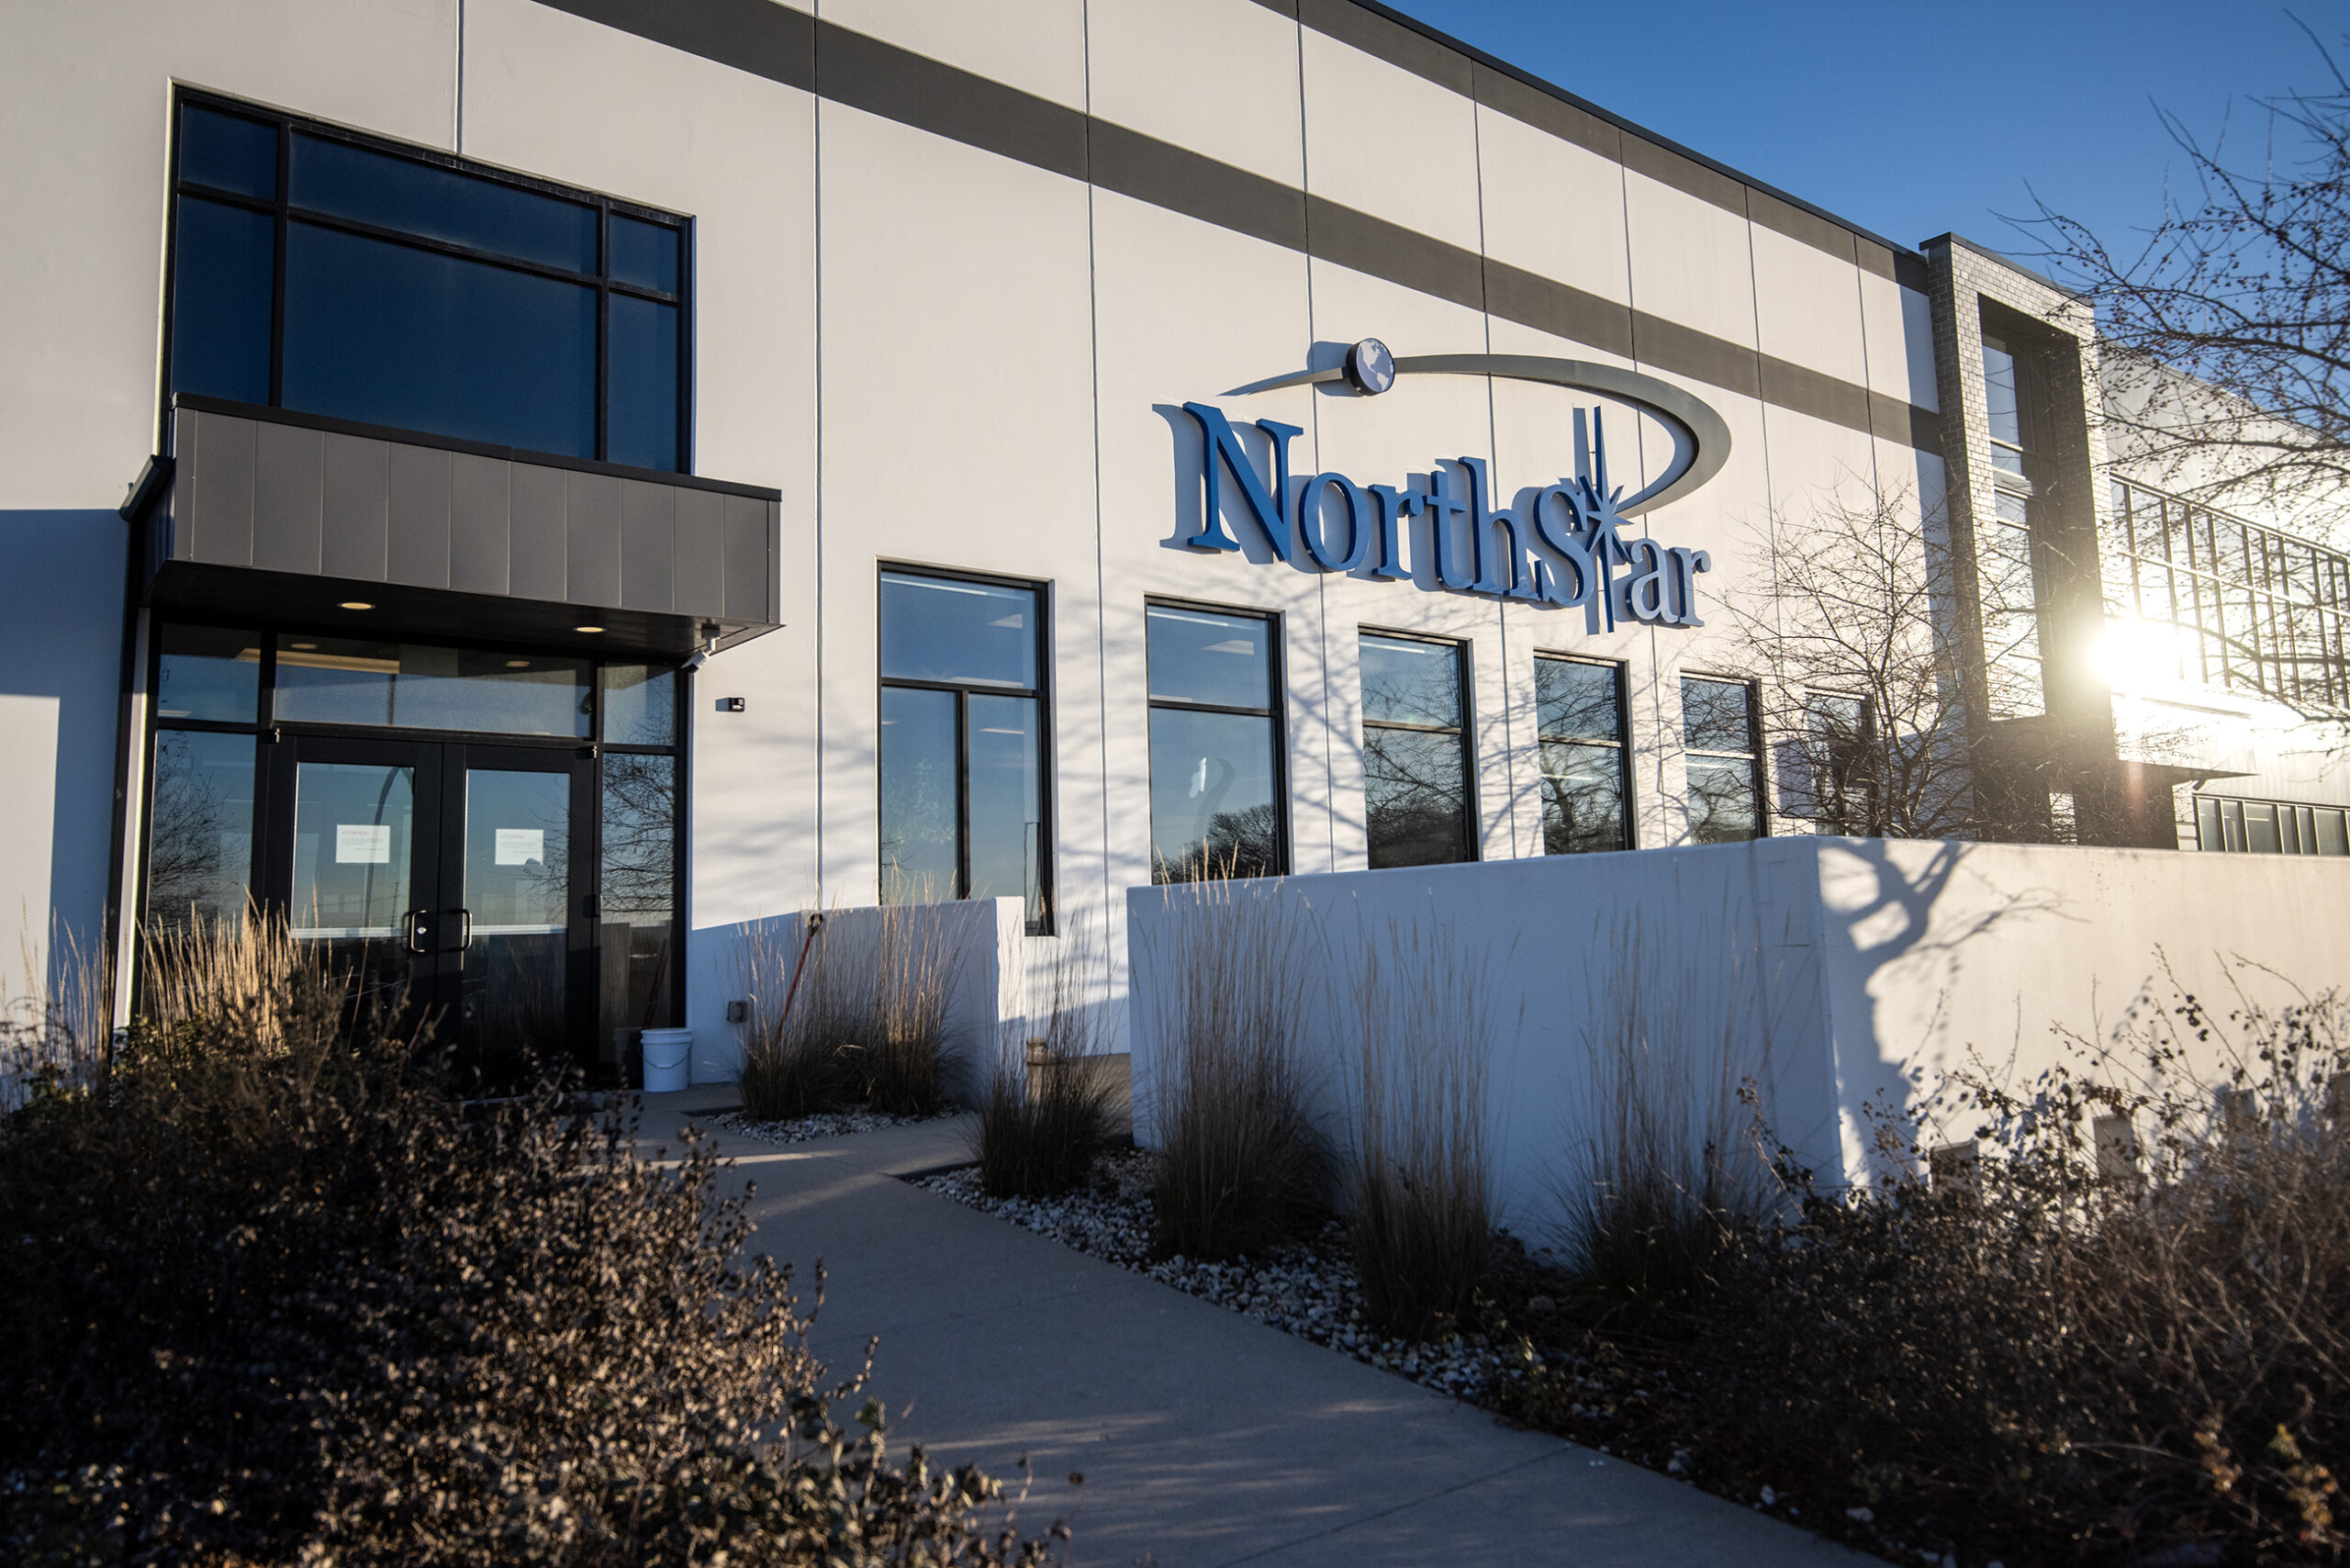 A building with an off-white exterior has a sign that says "NorthStar" on the front.